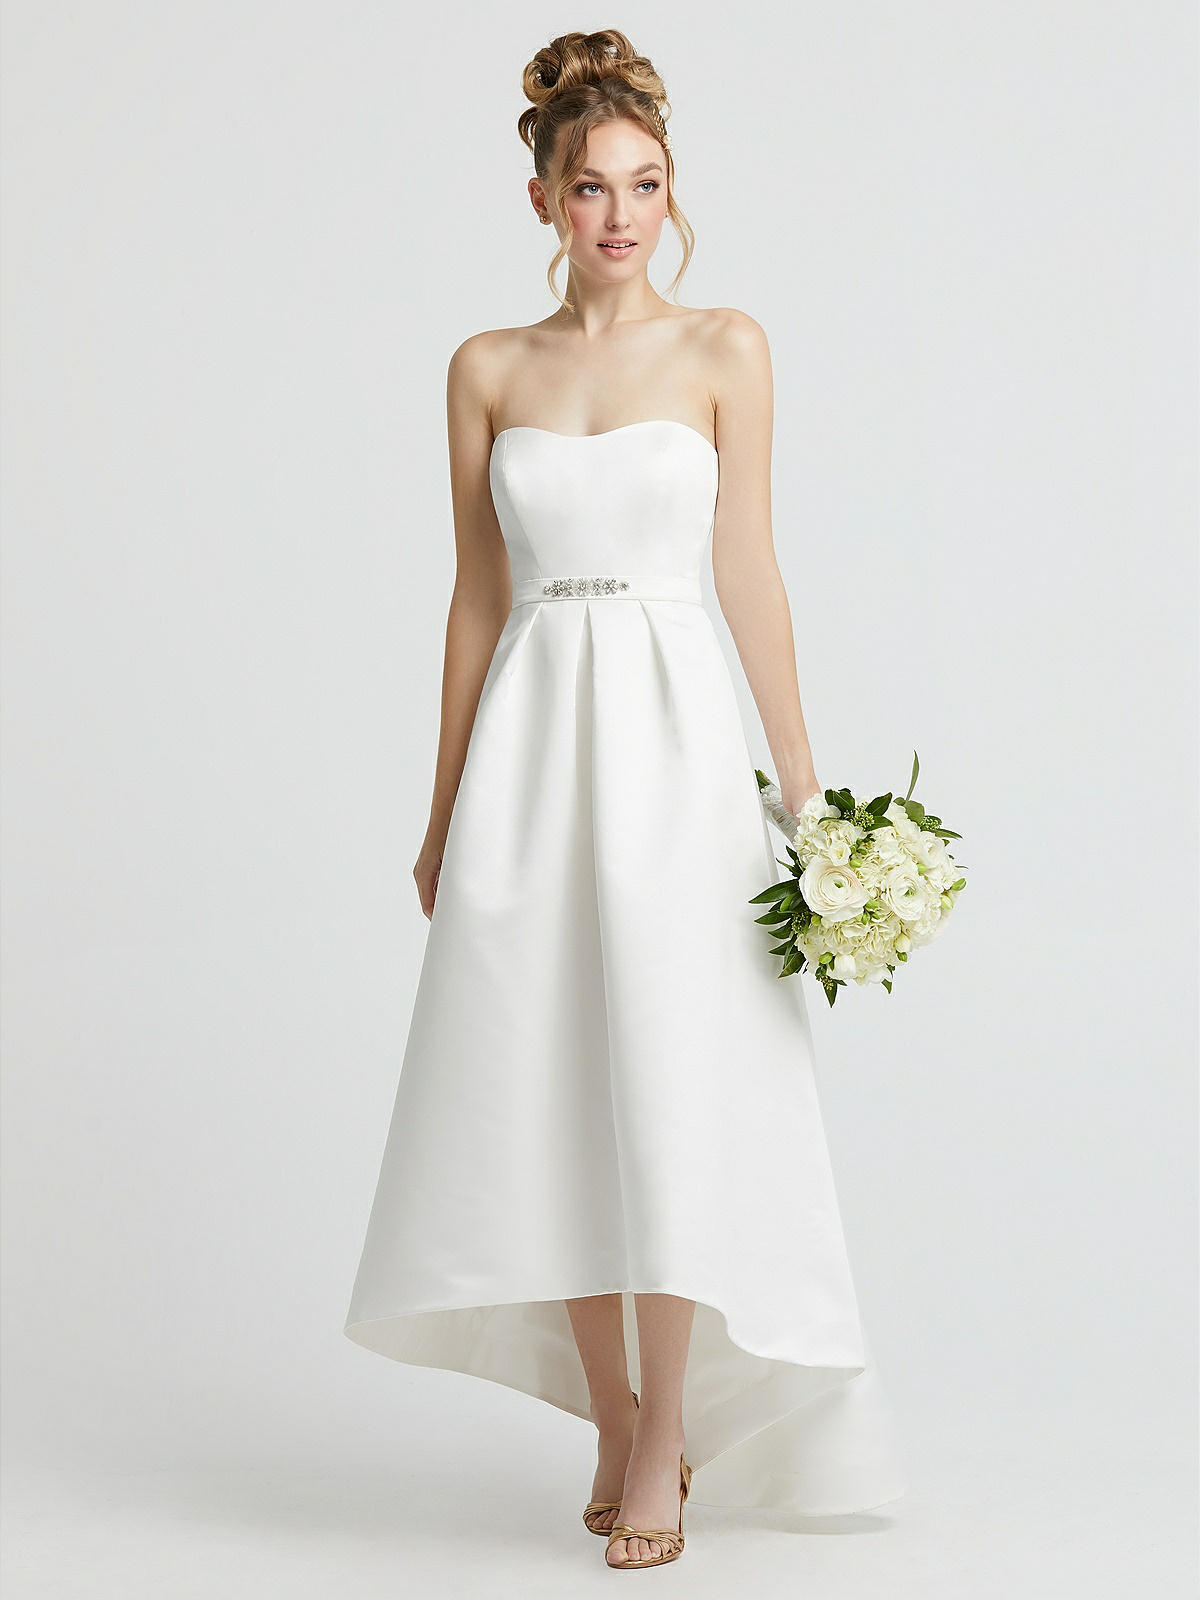 Sweetheart Strapless Satin Wedding Dress with Pockets